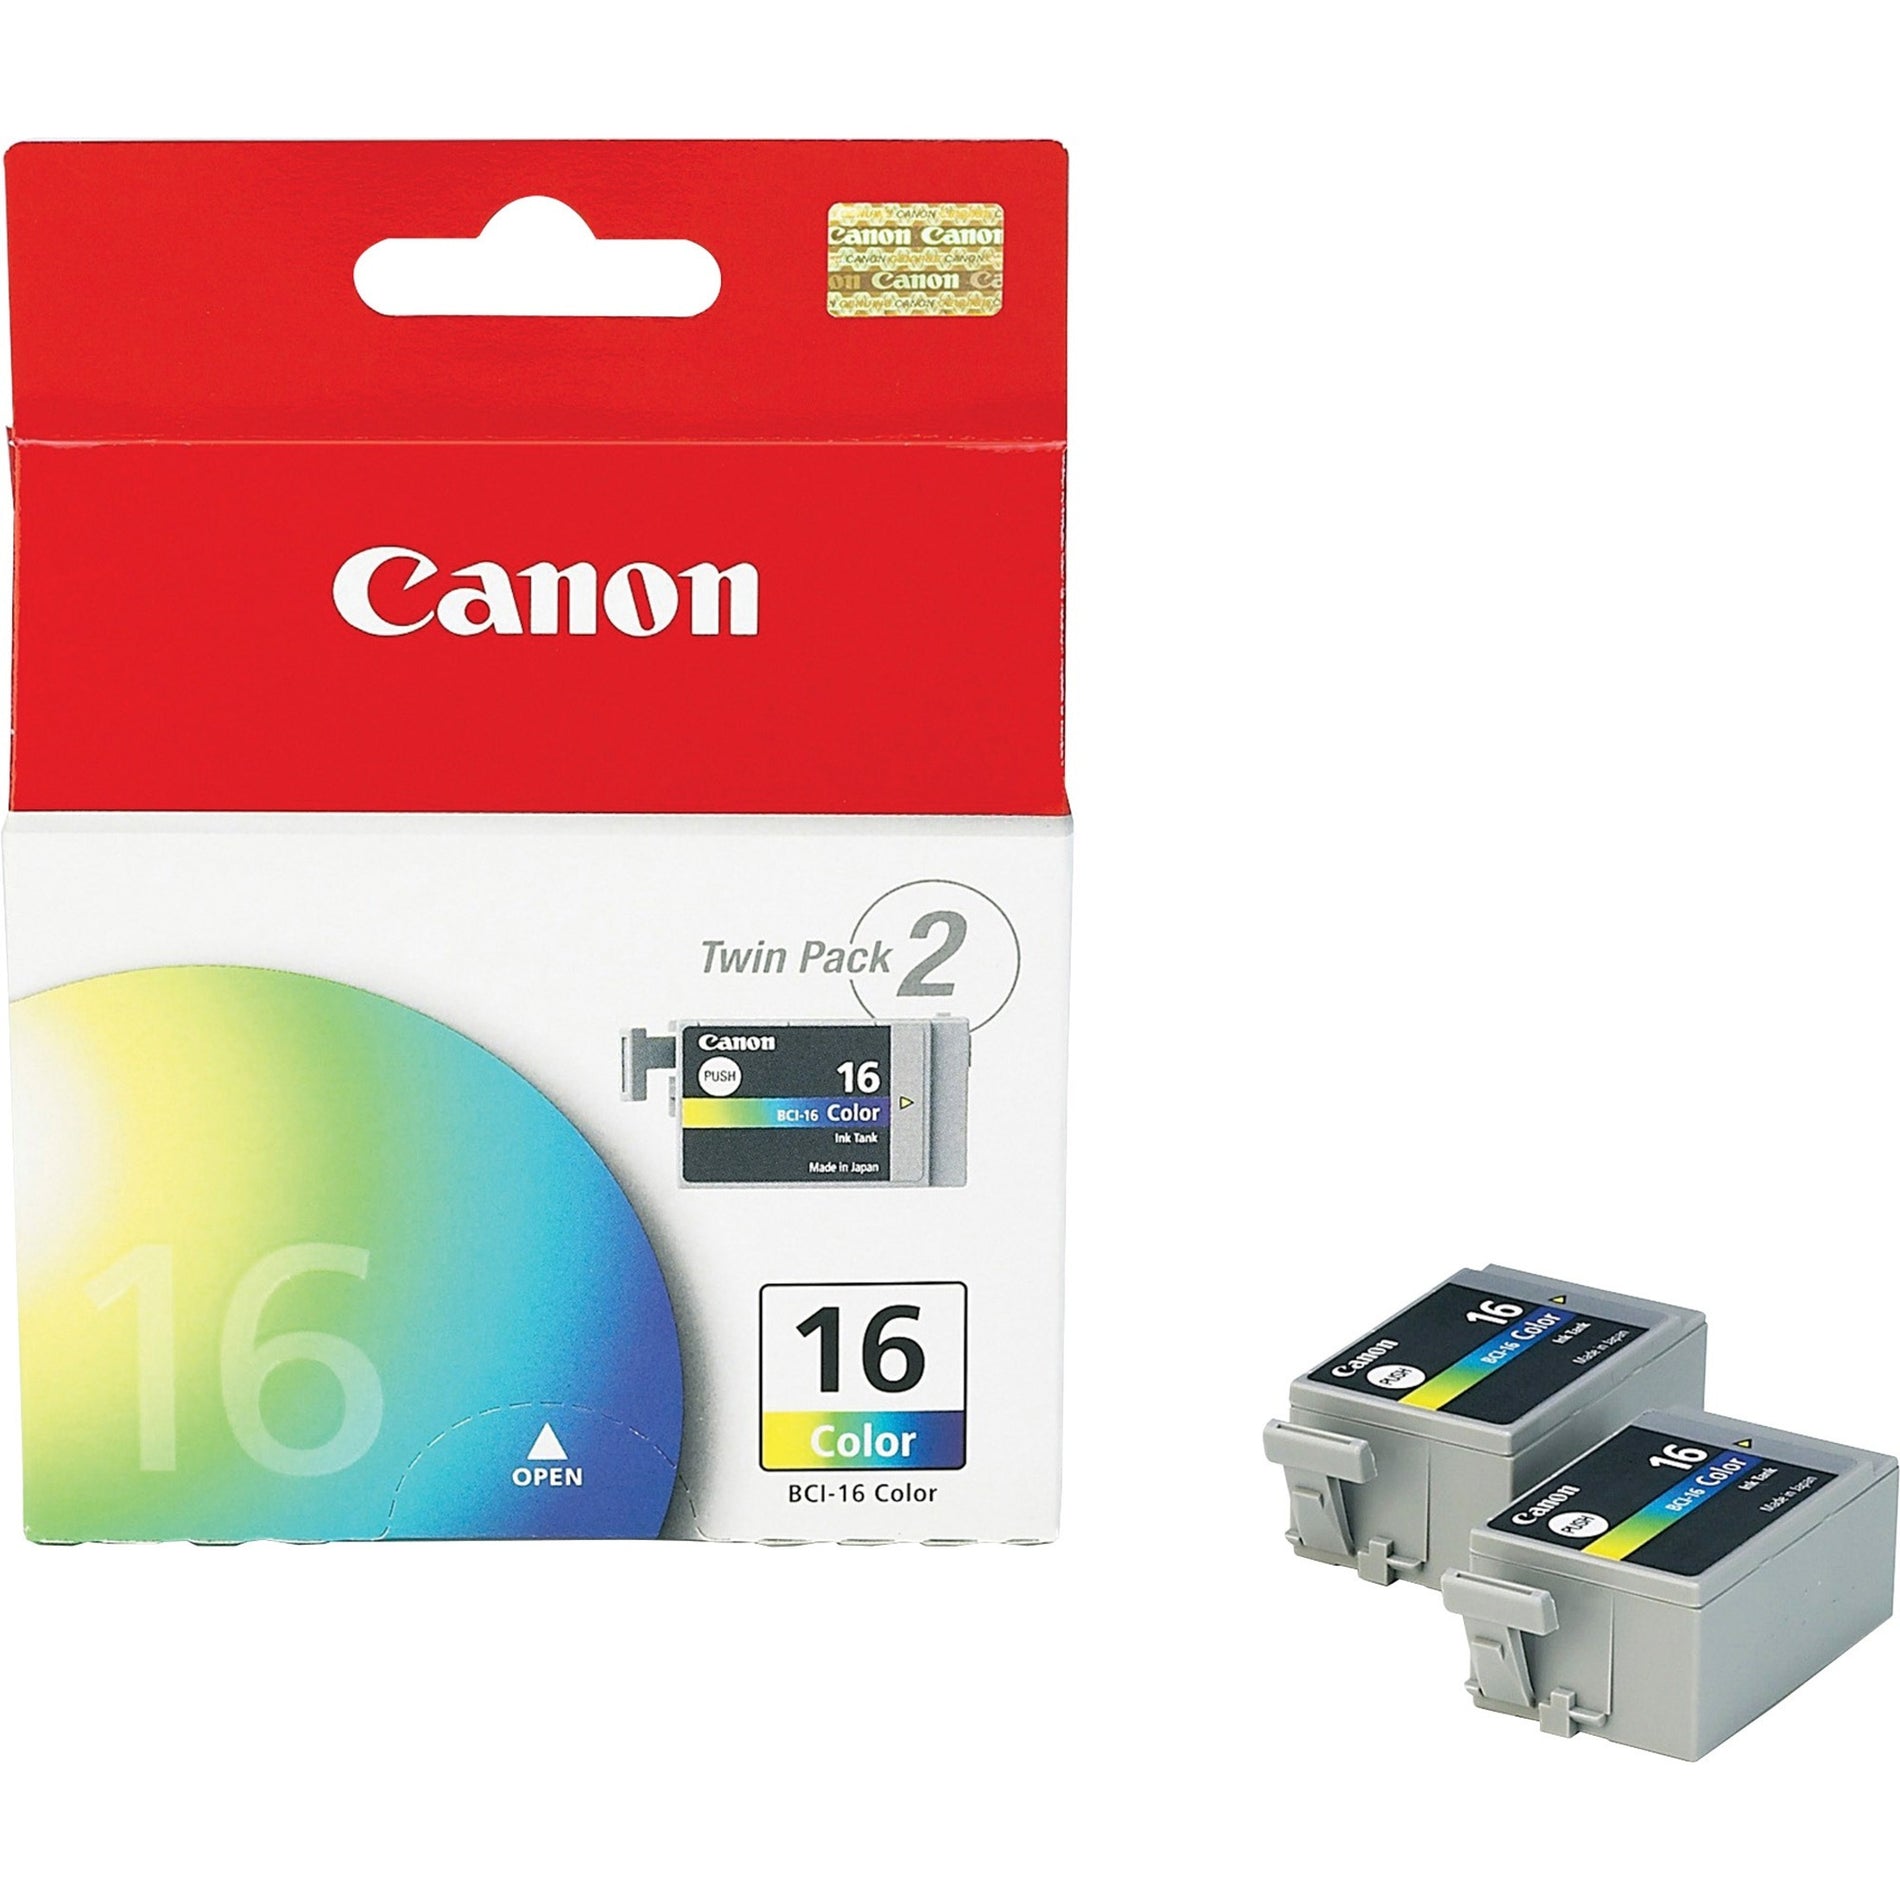 Canon 9818A003 BCI16 Color Ink Tank, Page Yield 75x2, 2/PK, Tri-Color